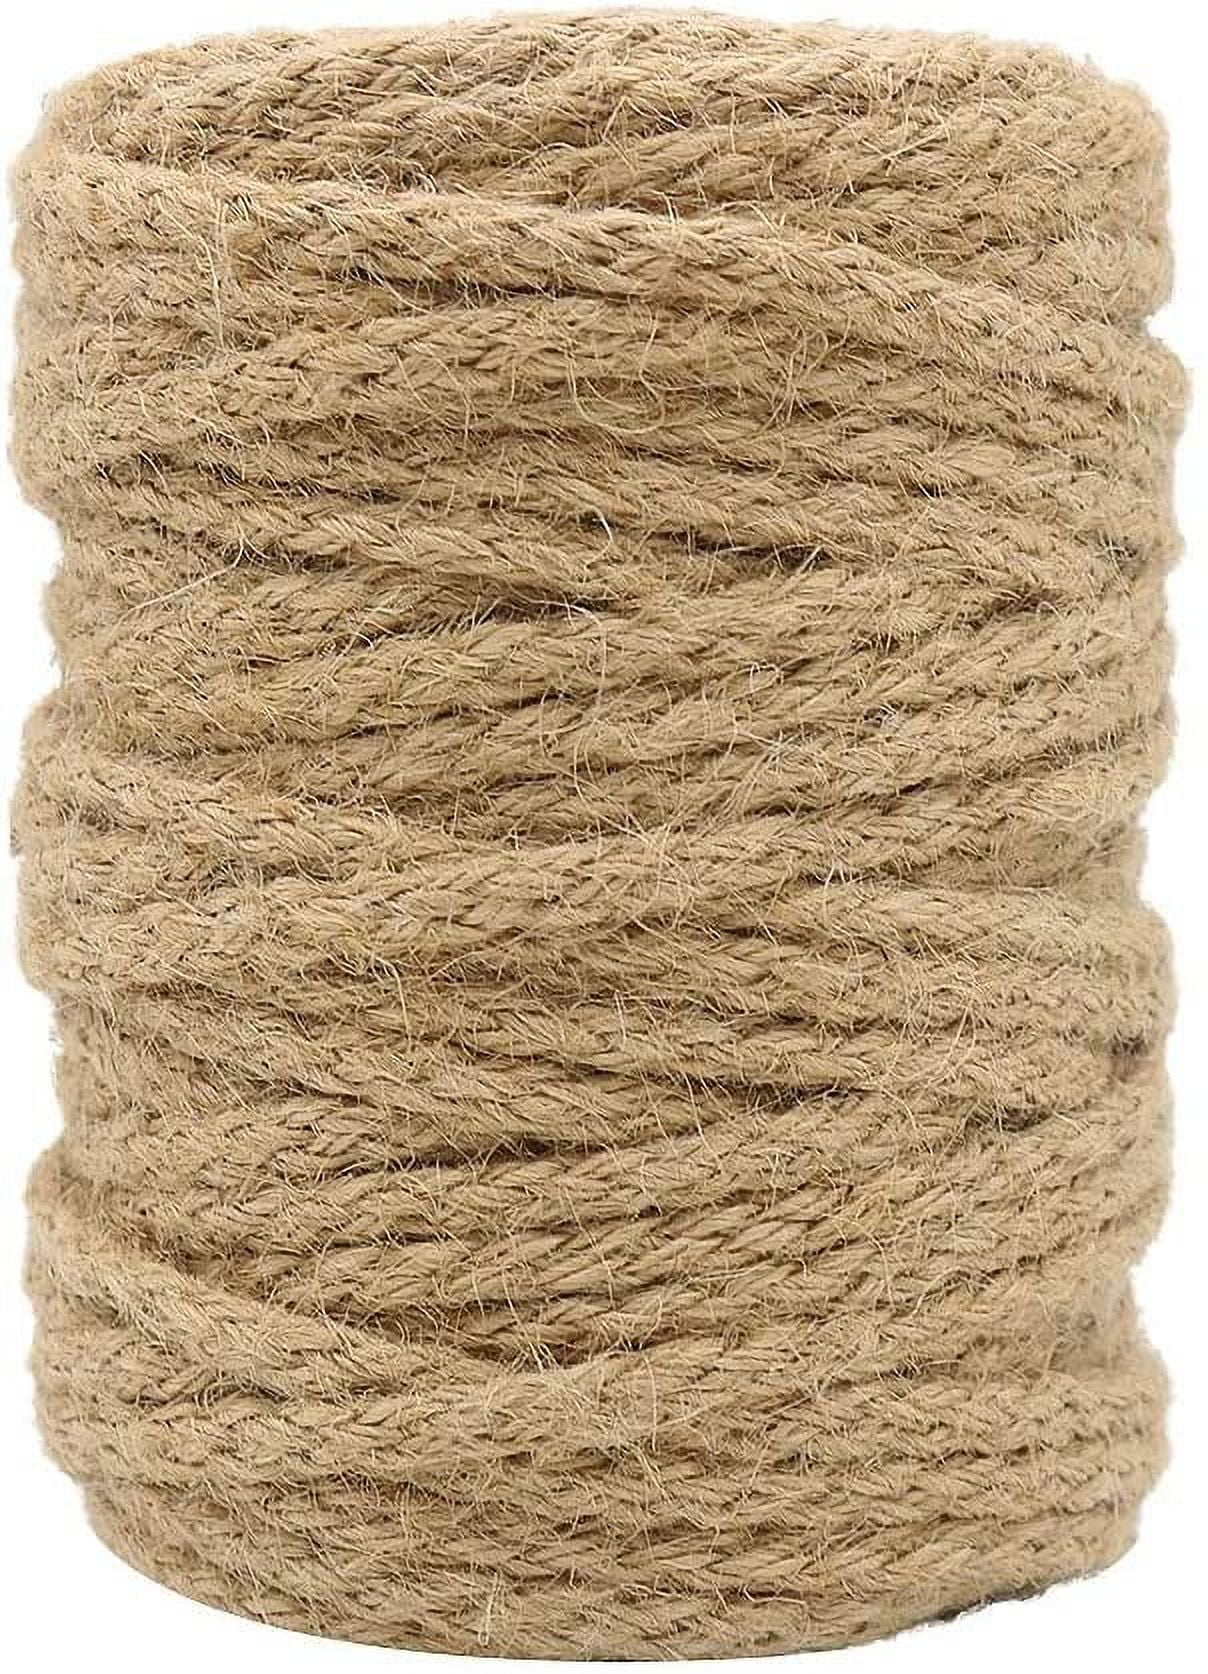 Pepperell Jute Craft Rope .5X50' Natural